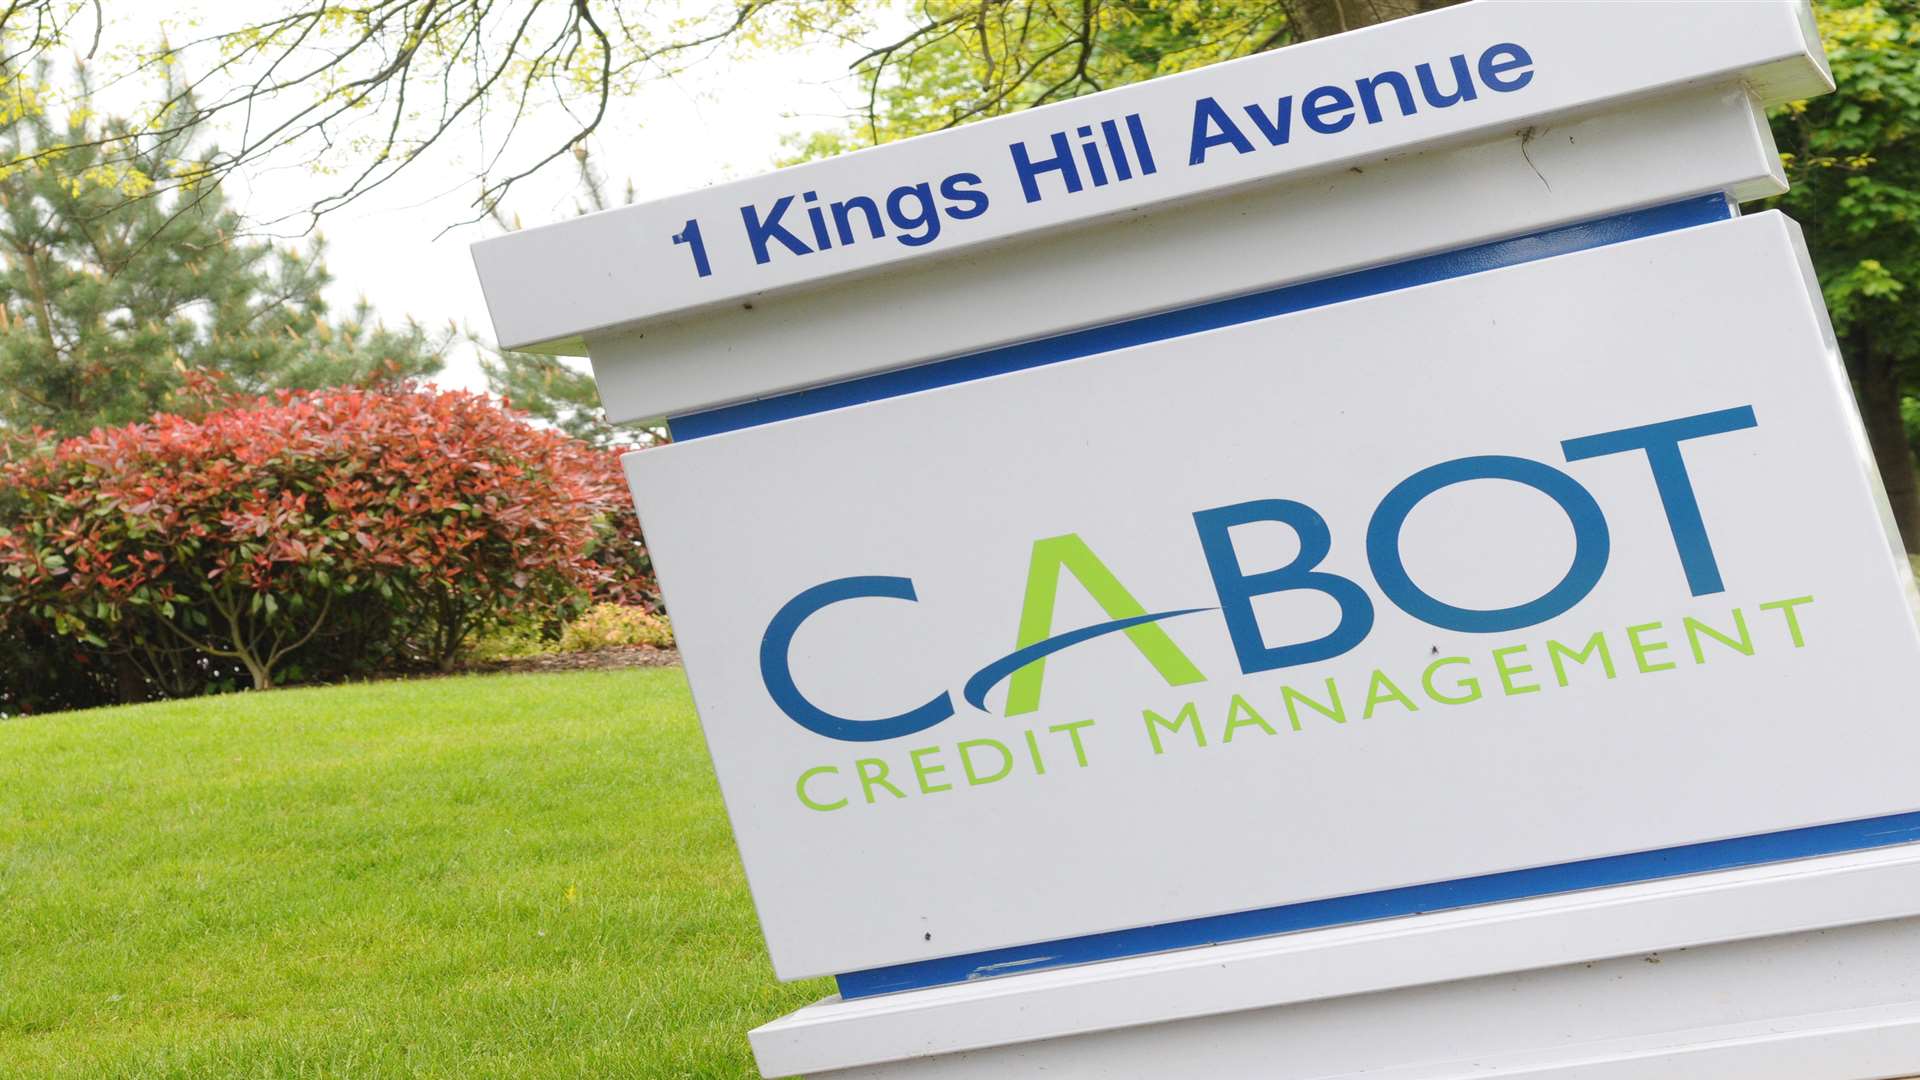 Cabot Credit Management has the prestigious 1 Kings Hill Avenue address